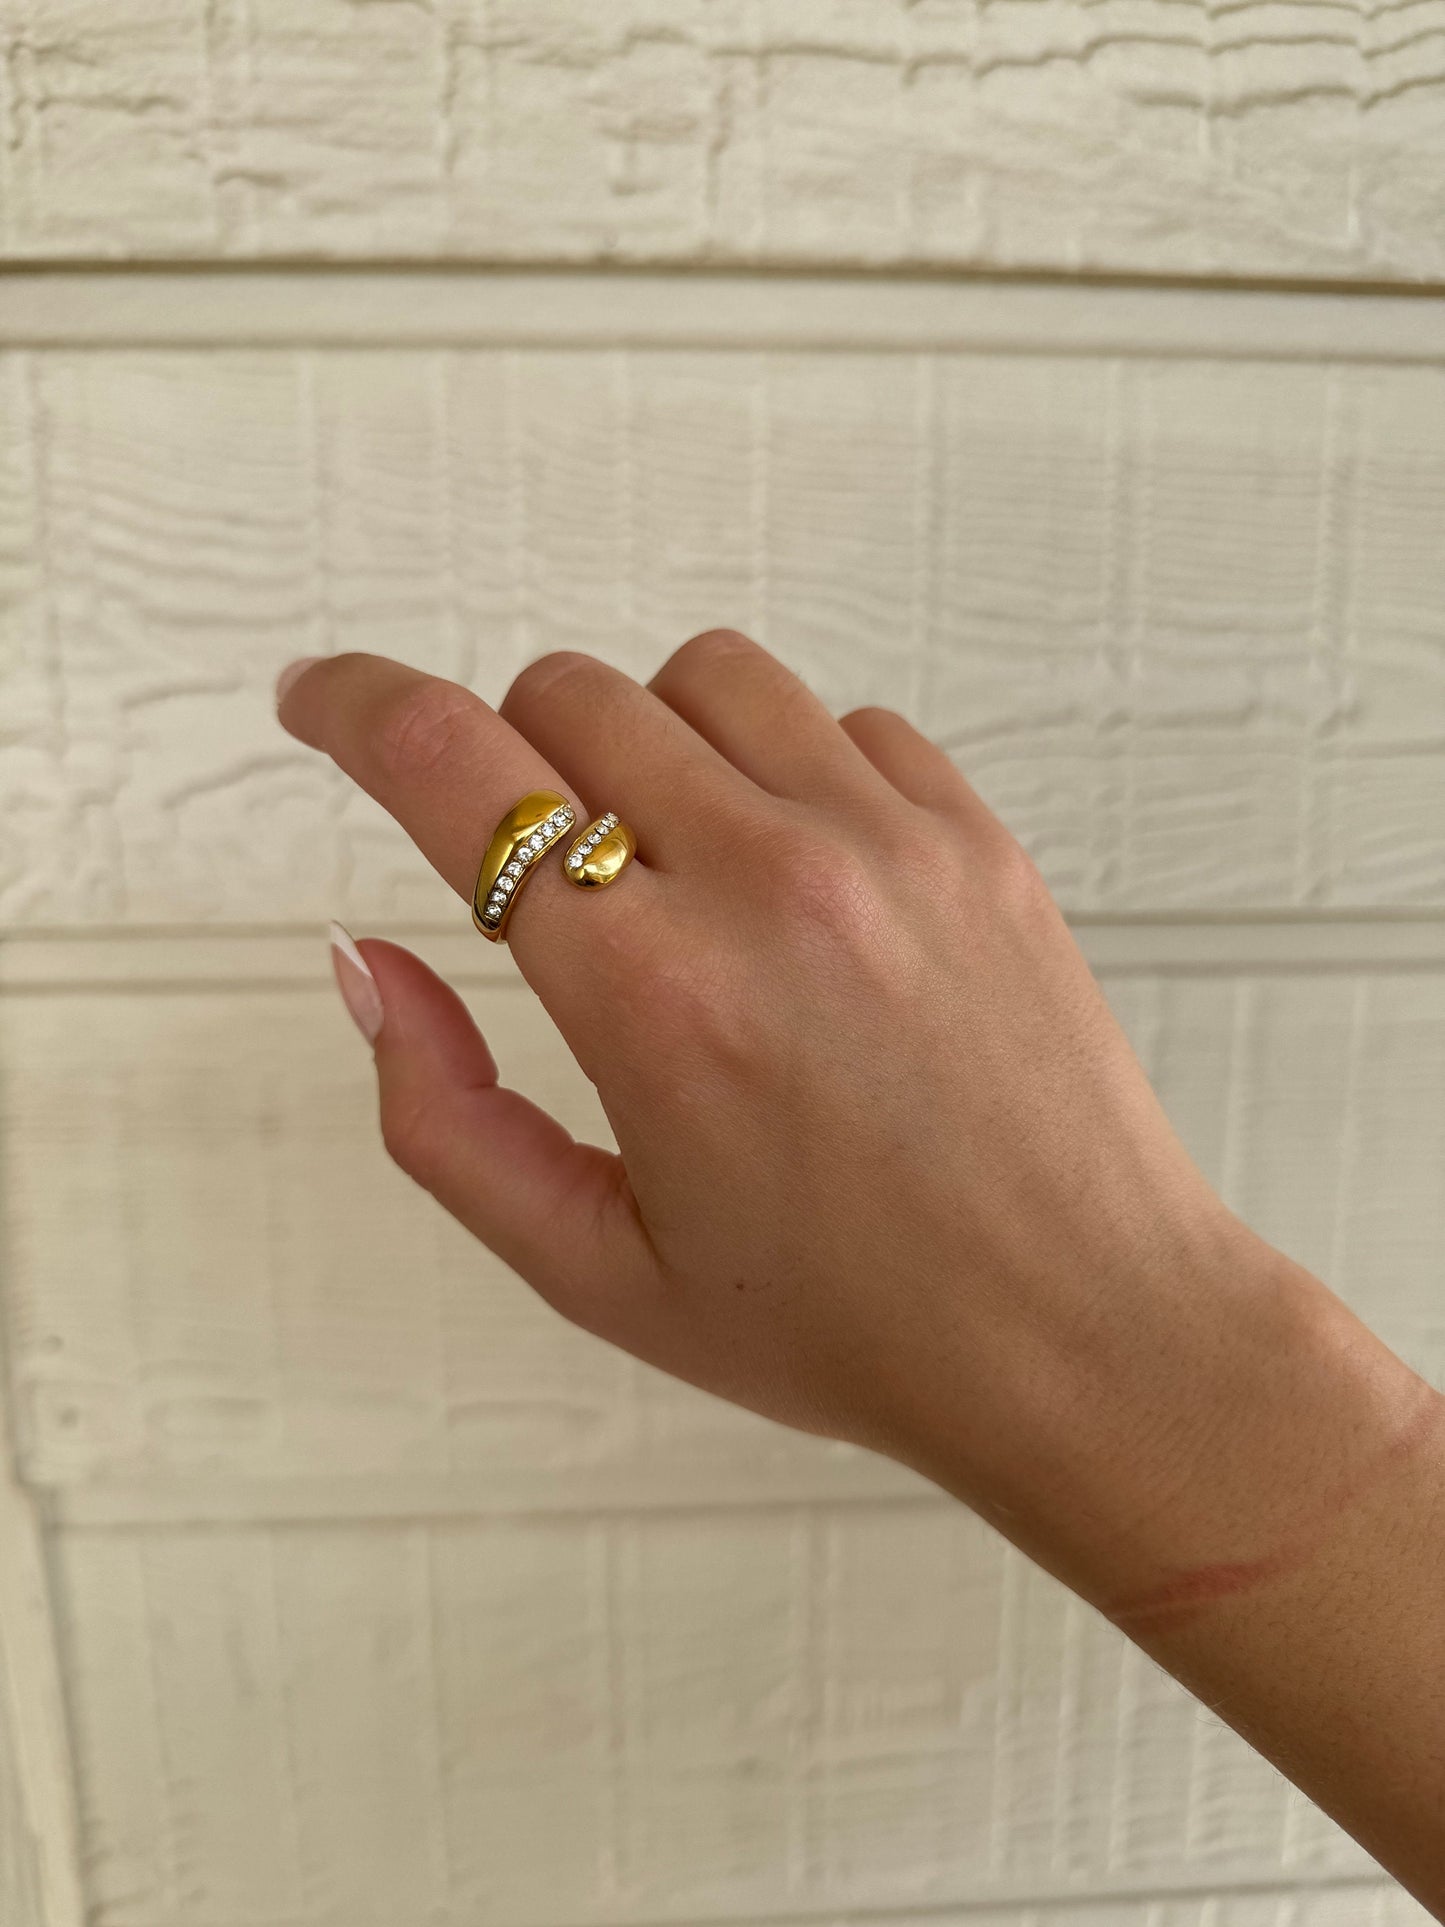 Adjustable ring, gold ring statement ring, thick gold wrap ring, open ring, minimalist gold adjustable ring, chunky gold ring, gift for her